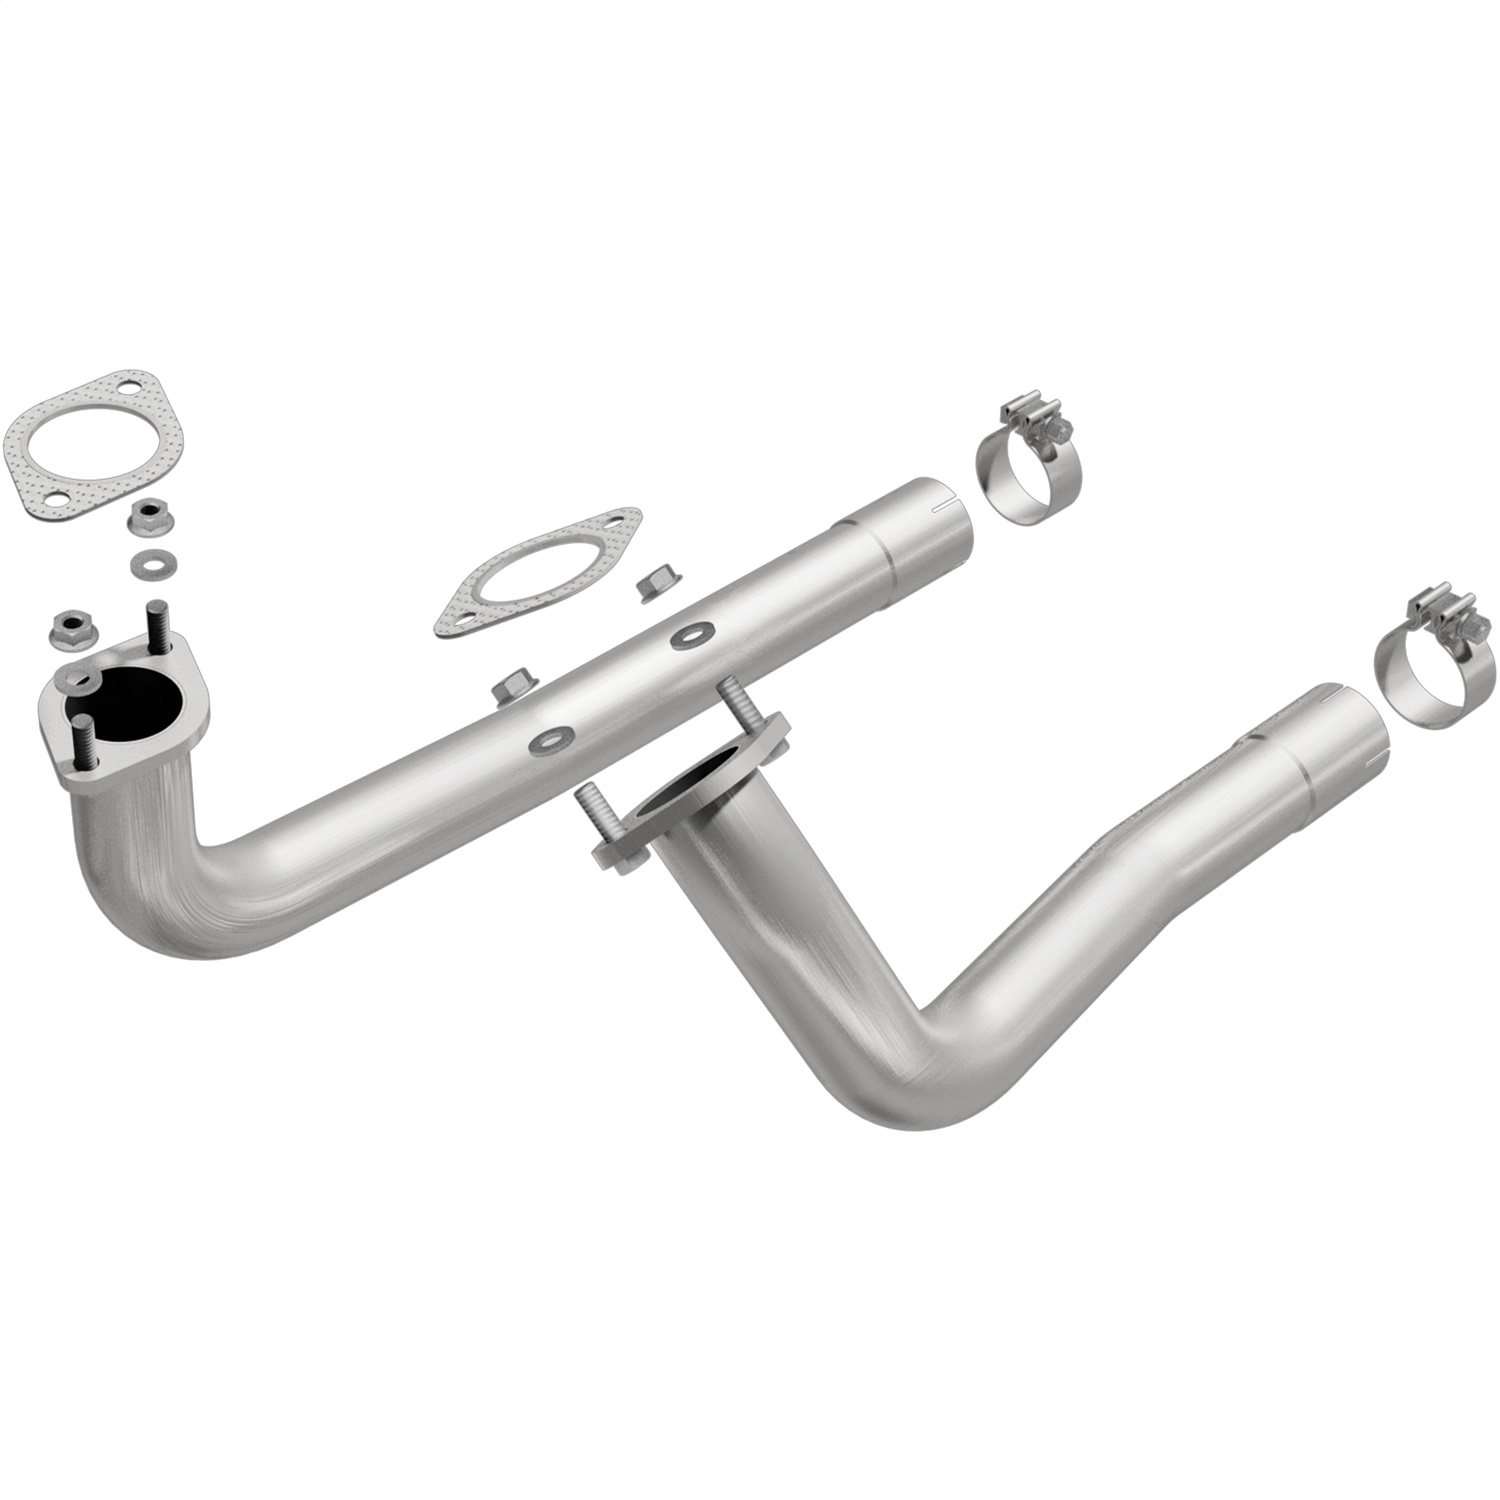 MagnaFlow Exhaust Products Magnaflow Performance Exhaust 19304 MF Manifold Pipes